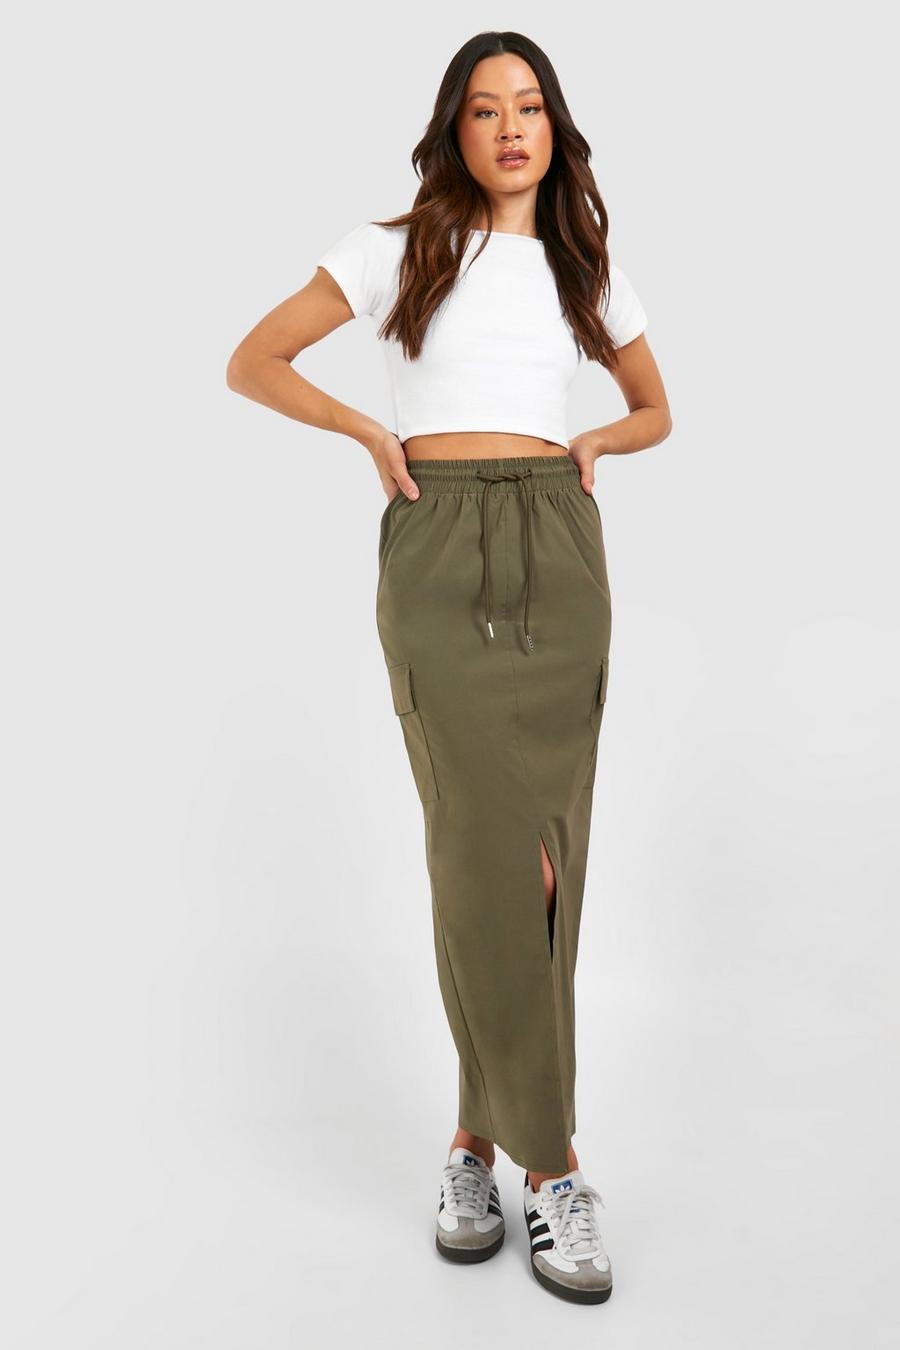 Khaki Tall Woven Stretch Pocket Detail Cargo Skirt image number 1